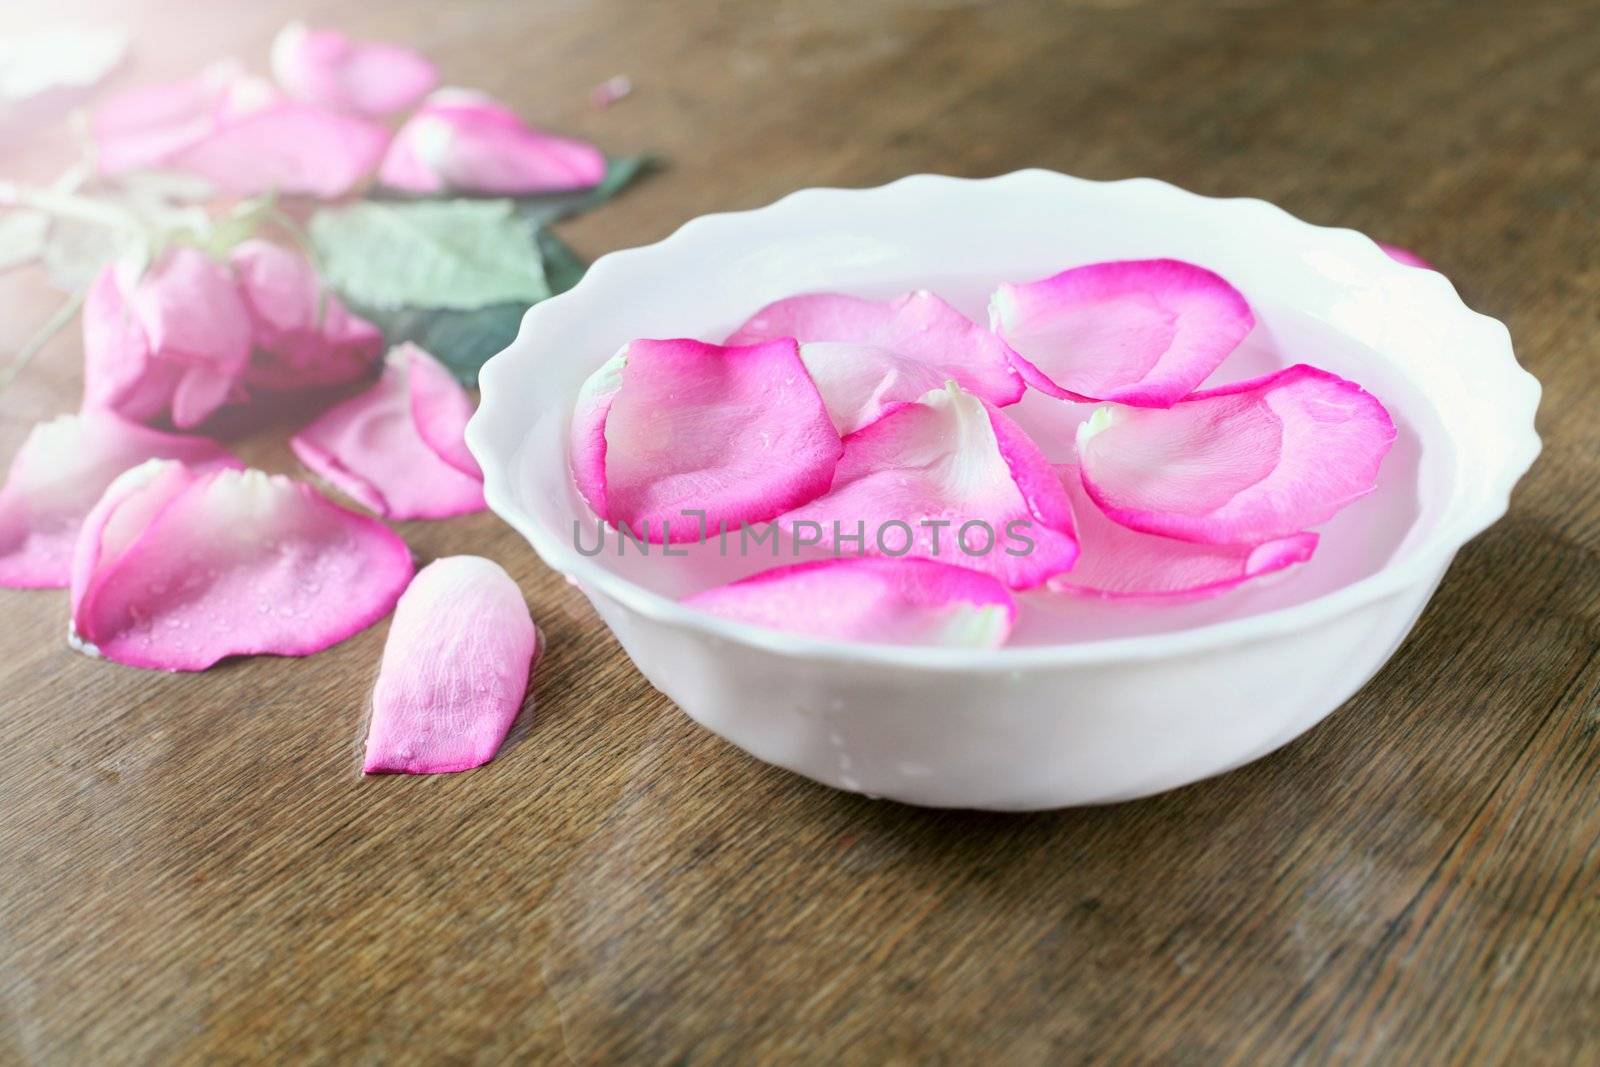 rose petals by anelina